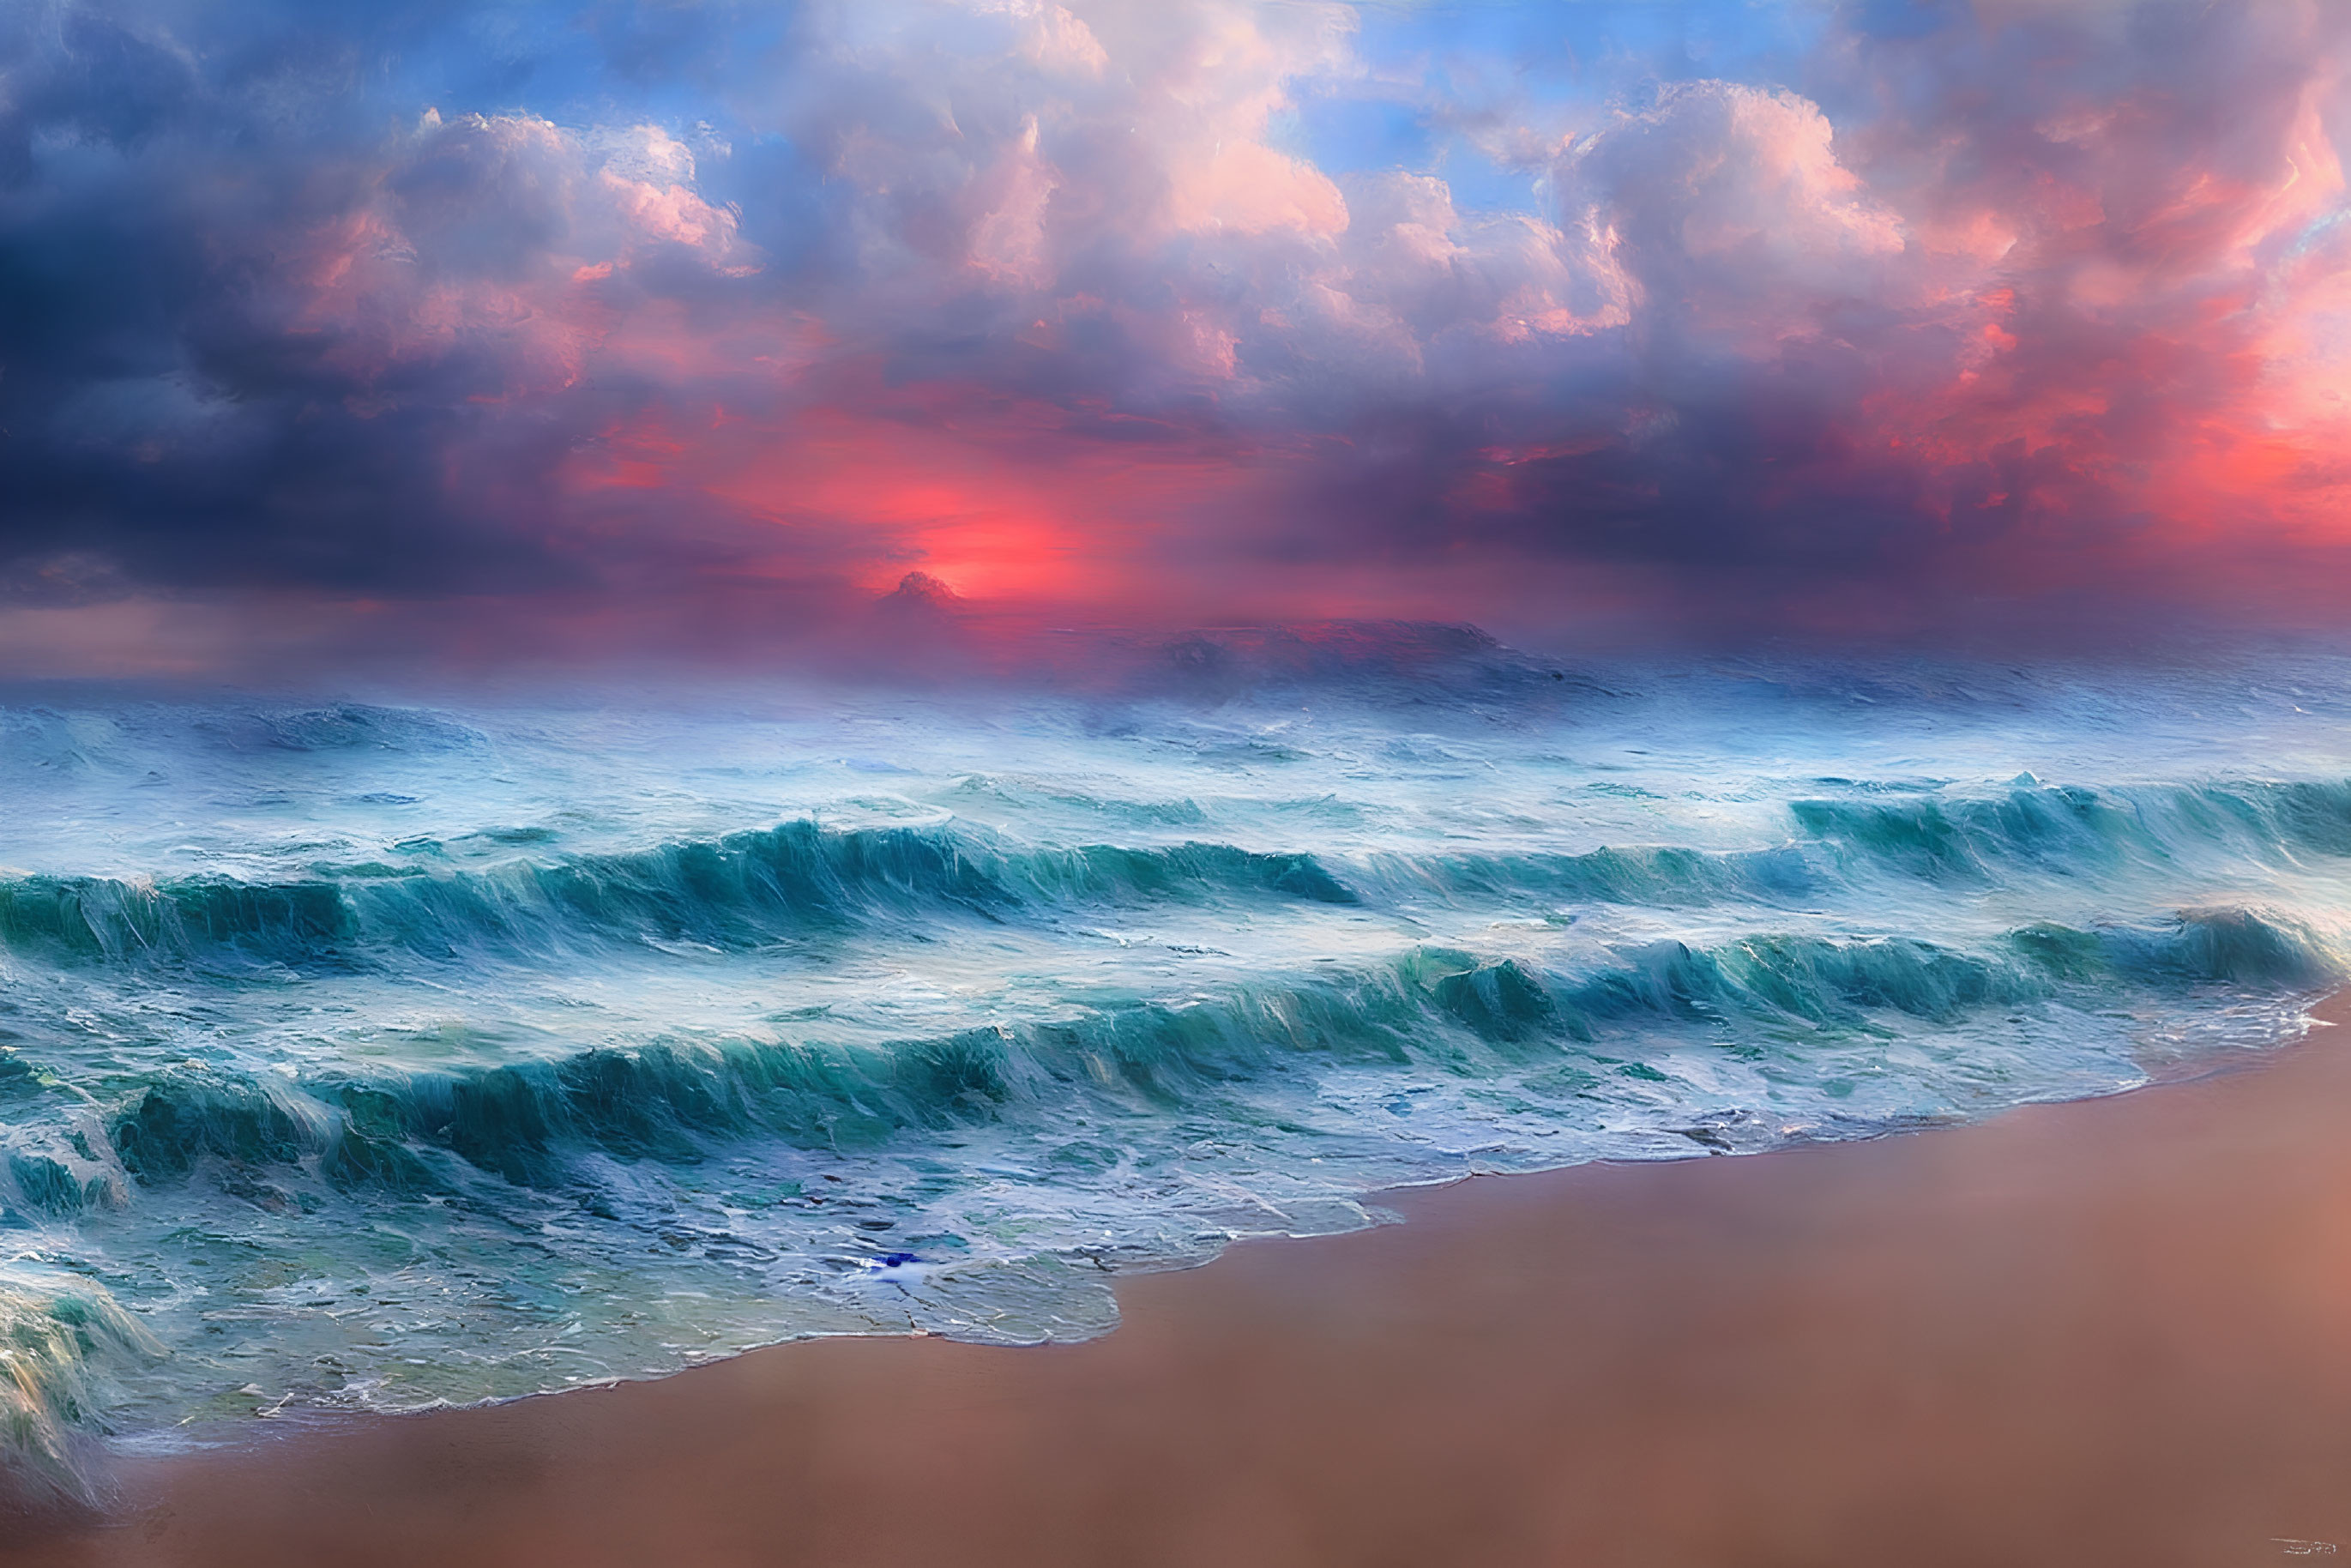 Scenic beach sunset with blue waves and colorful sky